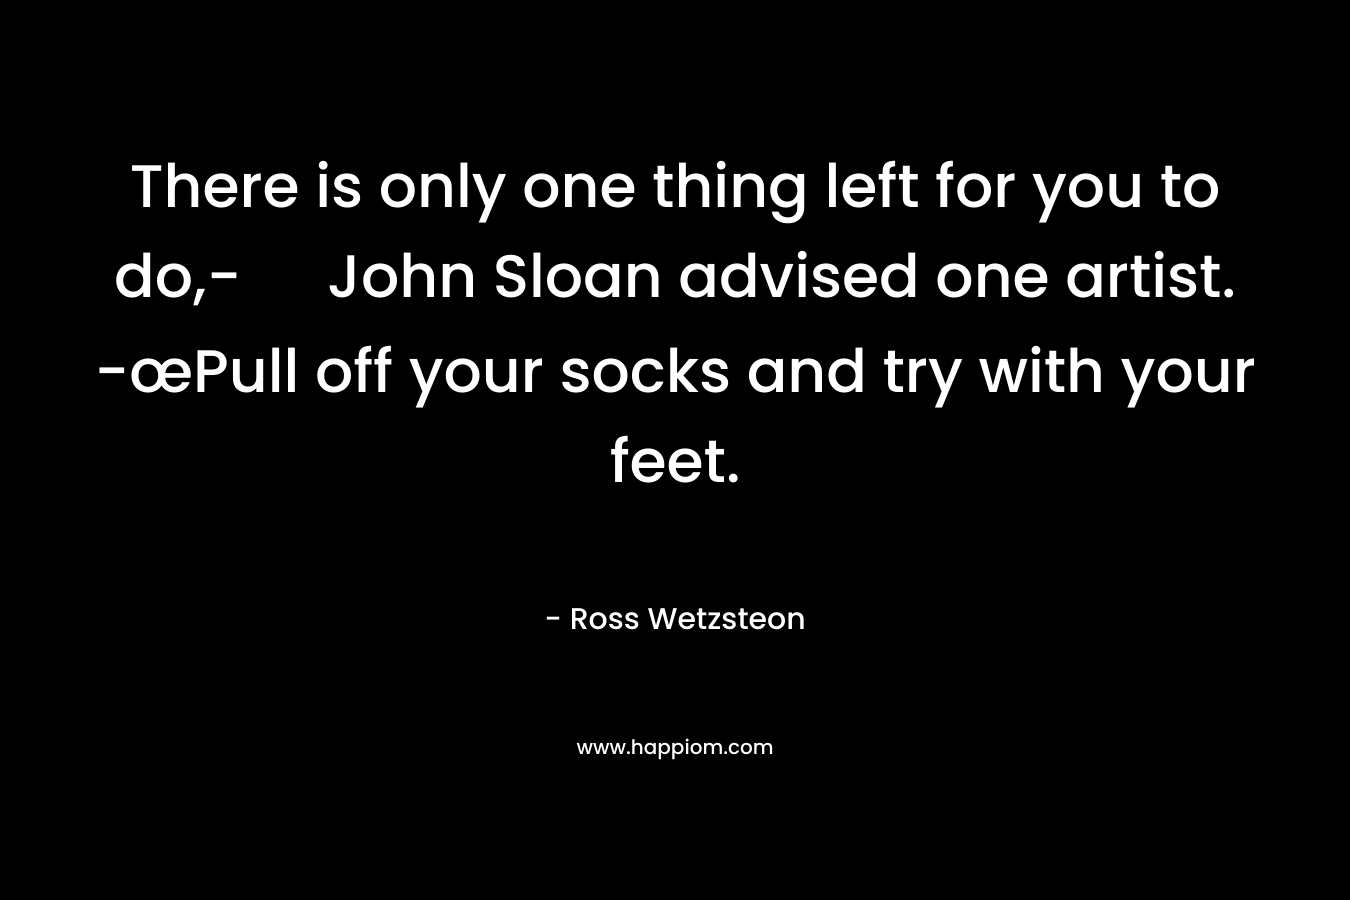 There is only one thing left for you to do,- John Sloan advised one artist. -œPull off your socks and try with your feet. – Ross Wetzsteon